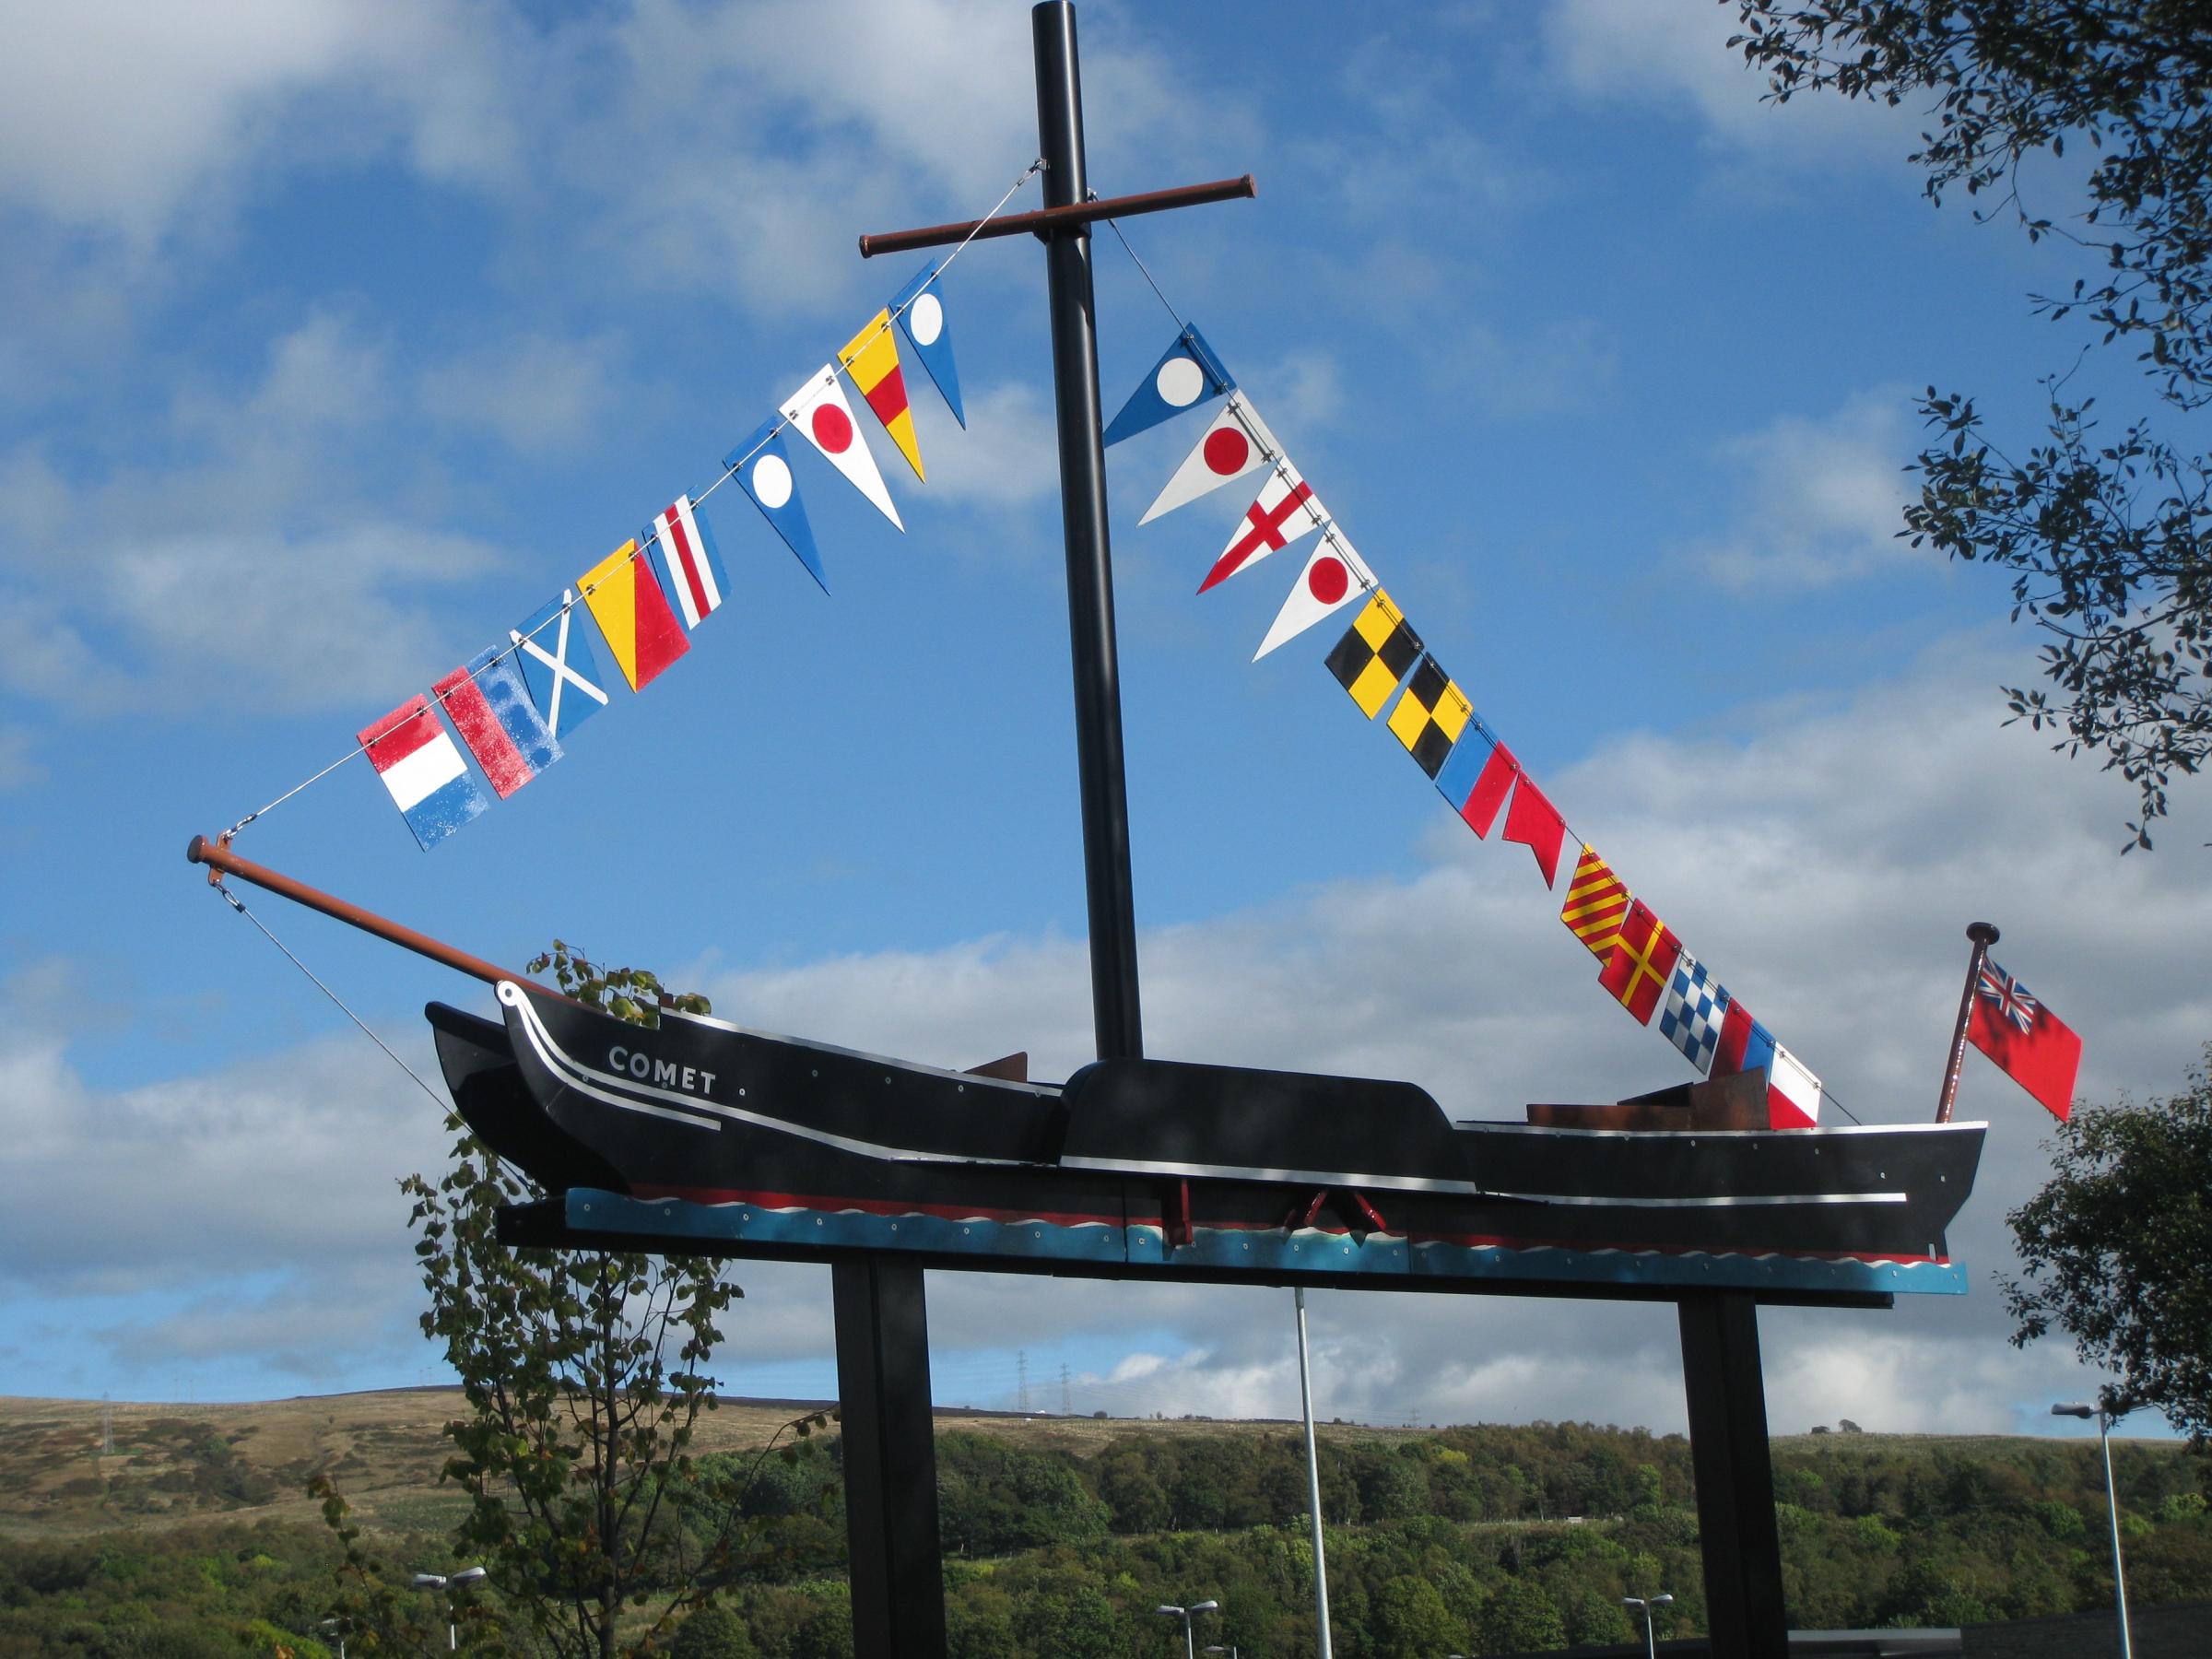 A scale replica of the pioneering steamship Comet outside Helensburghs Morrisons supermarket